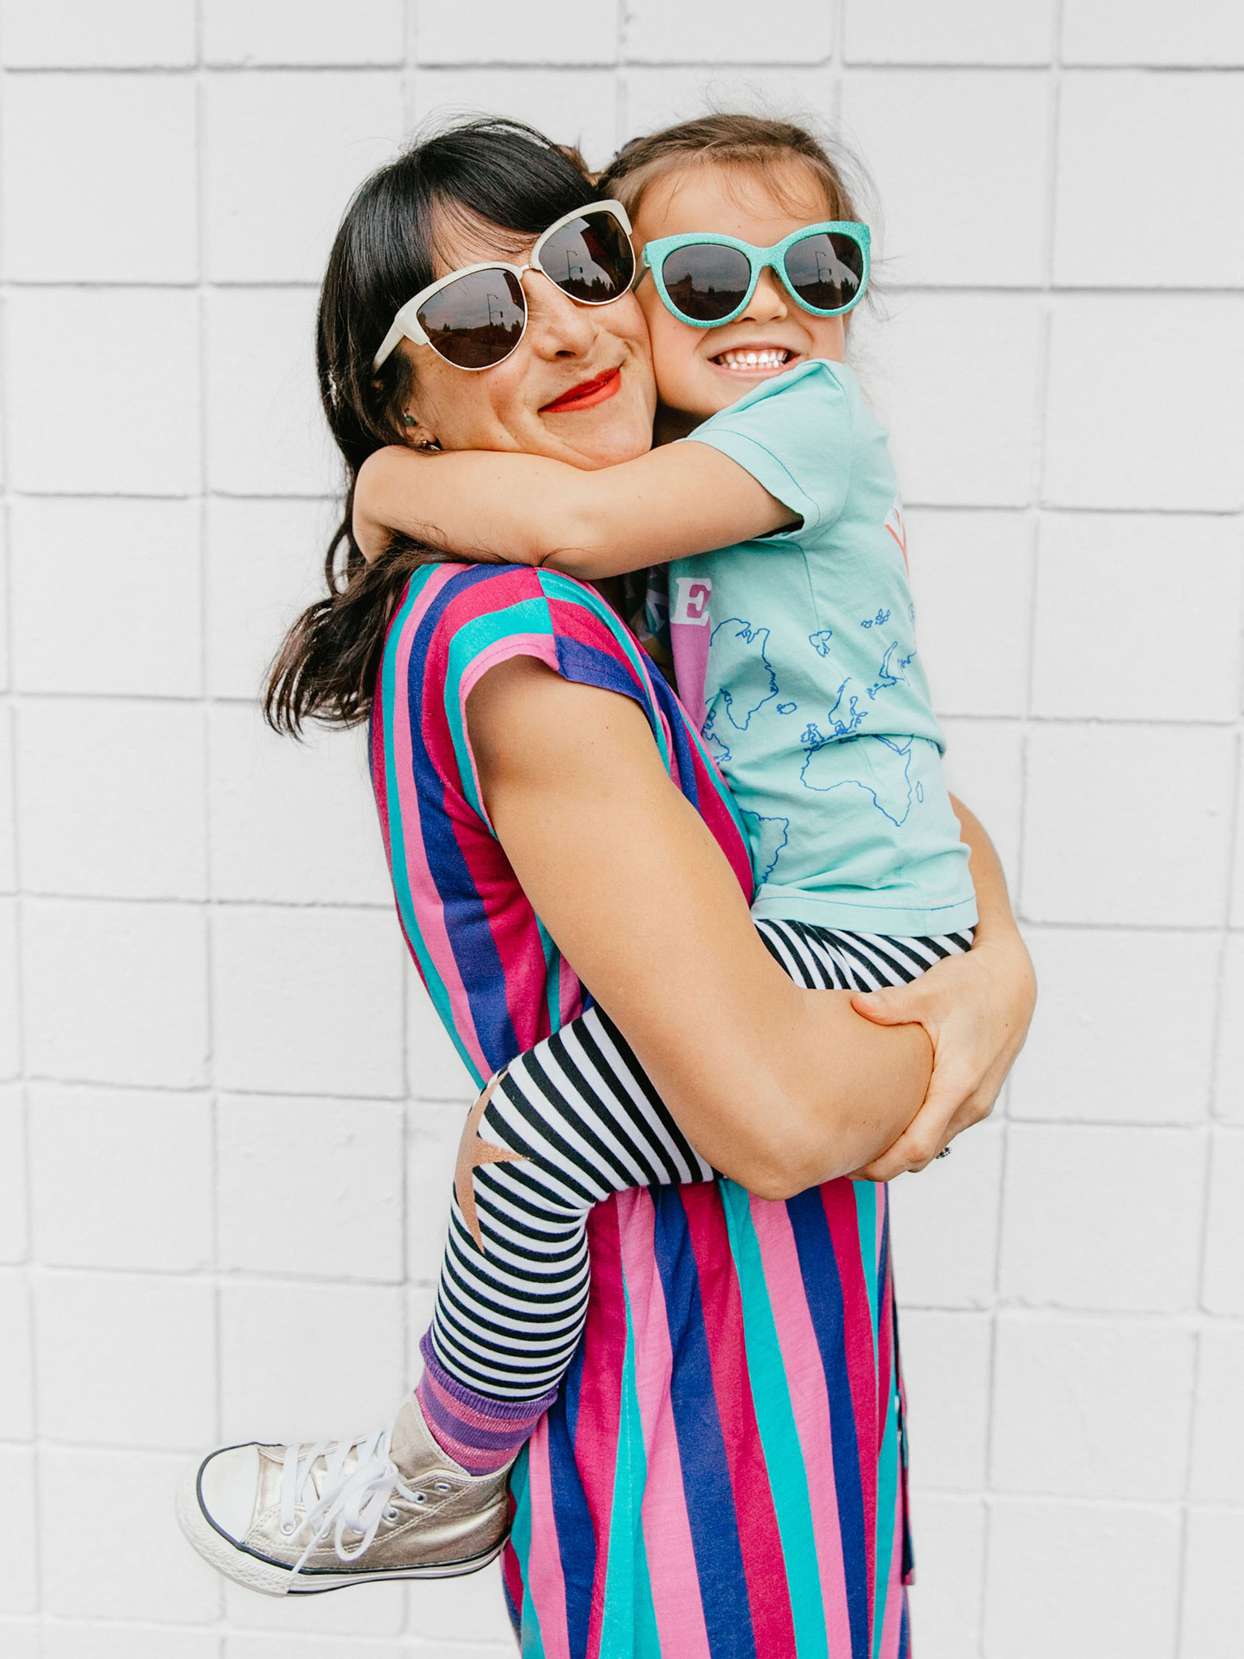 mom holding daughter both smiling and wearing sunglasses